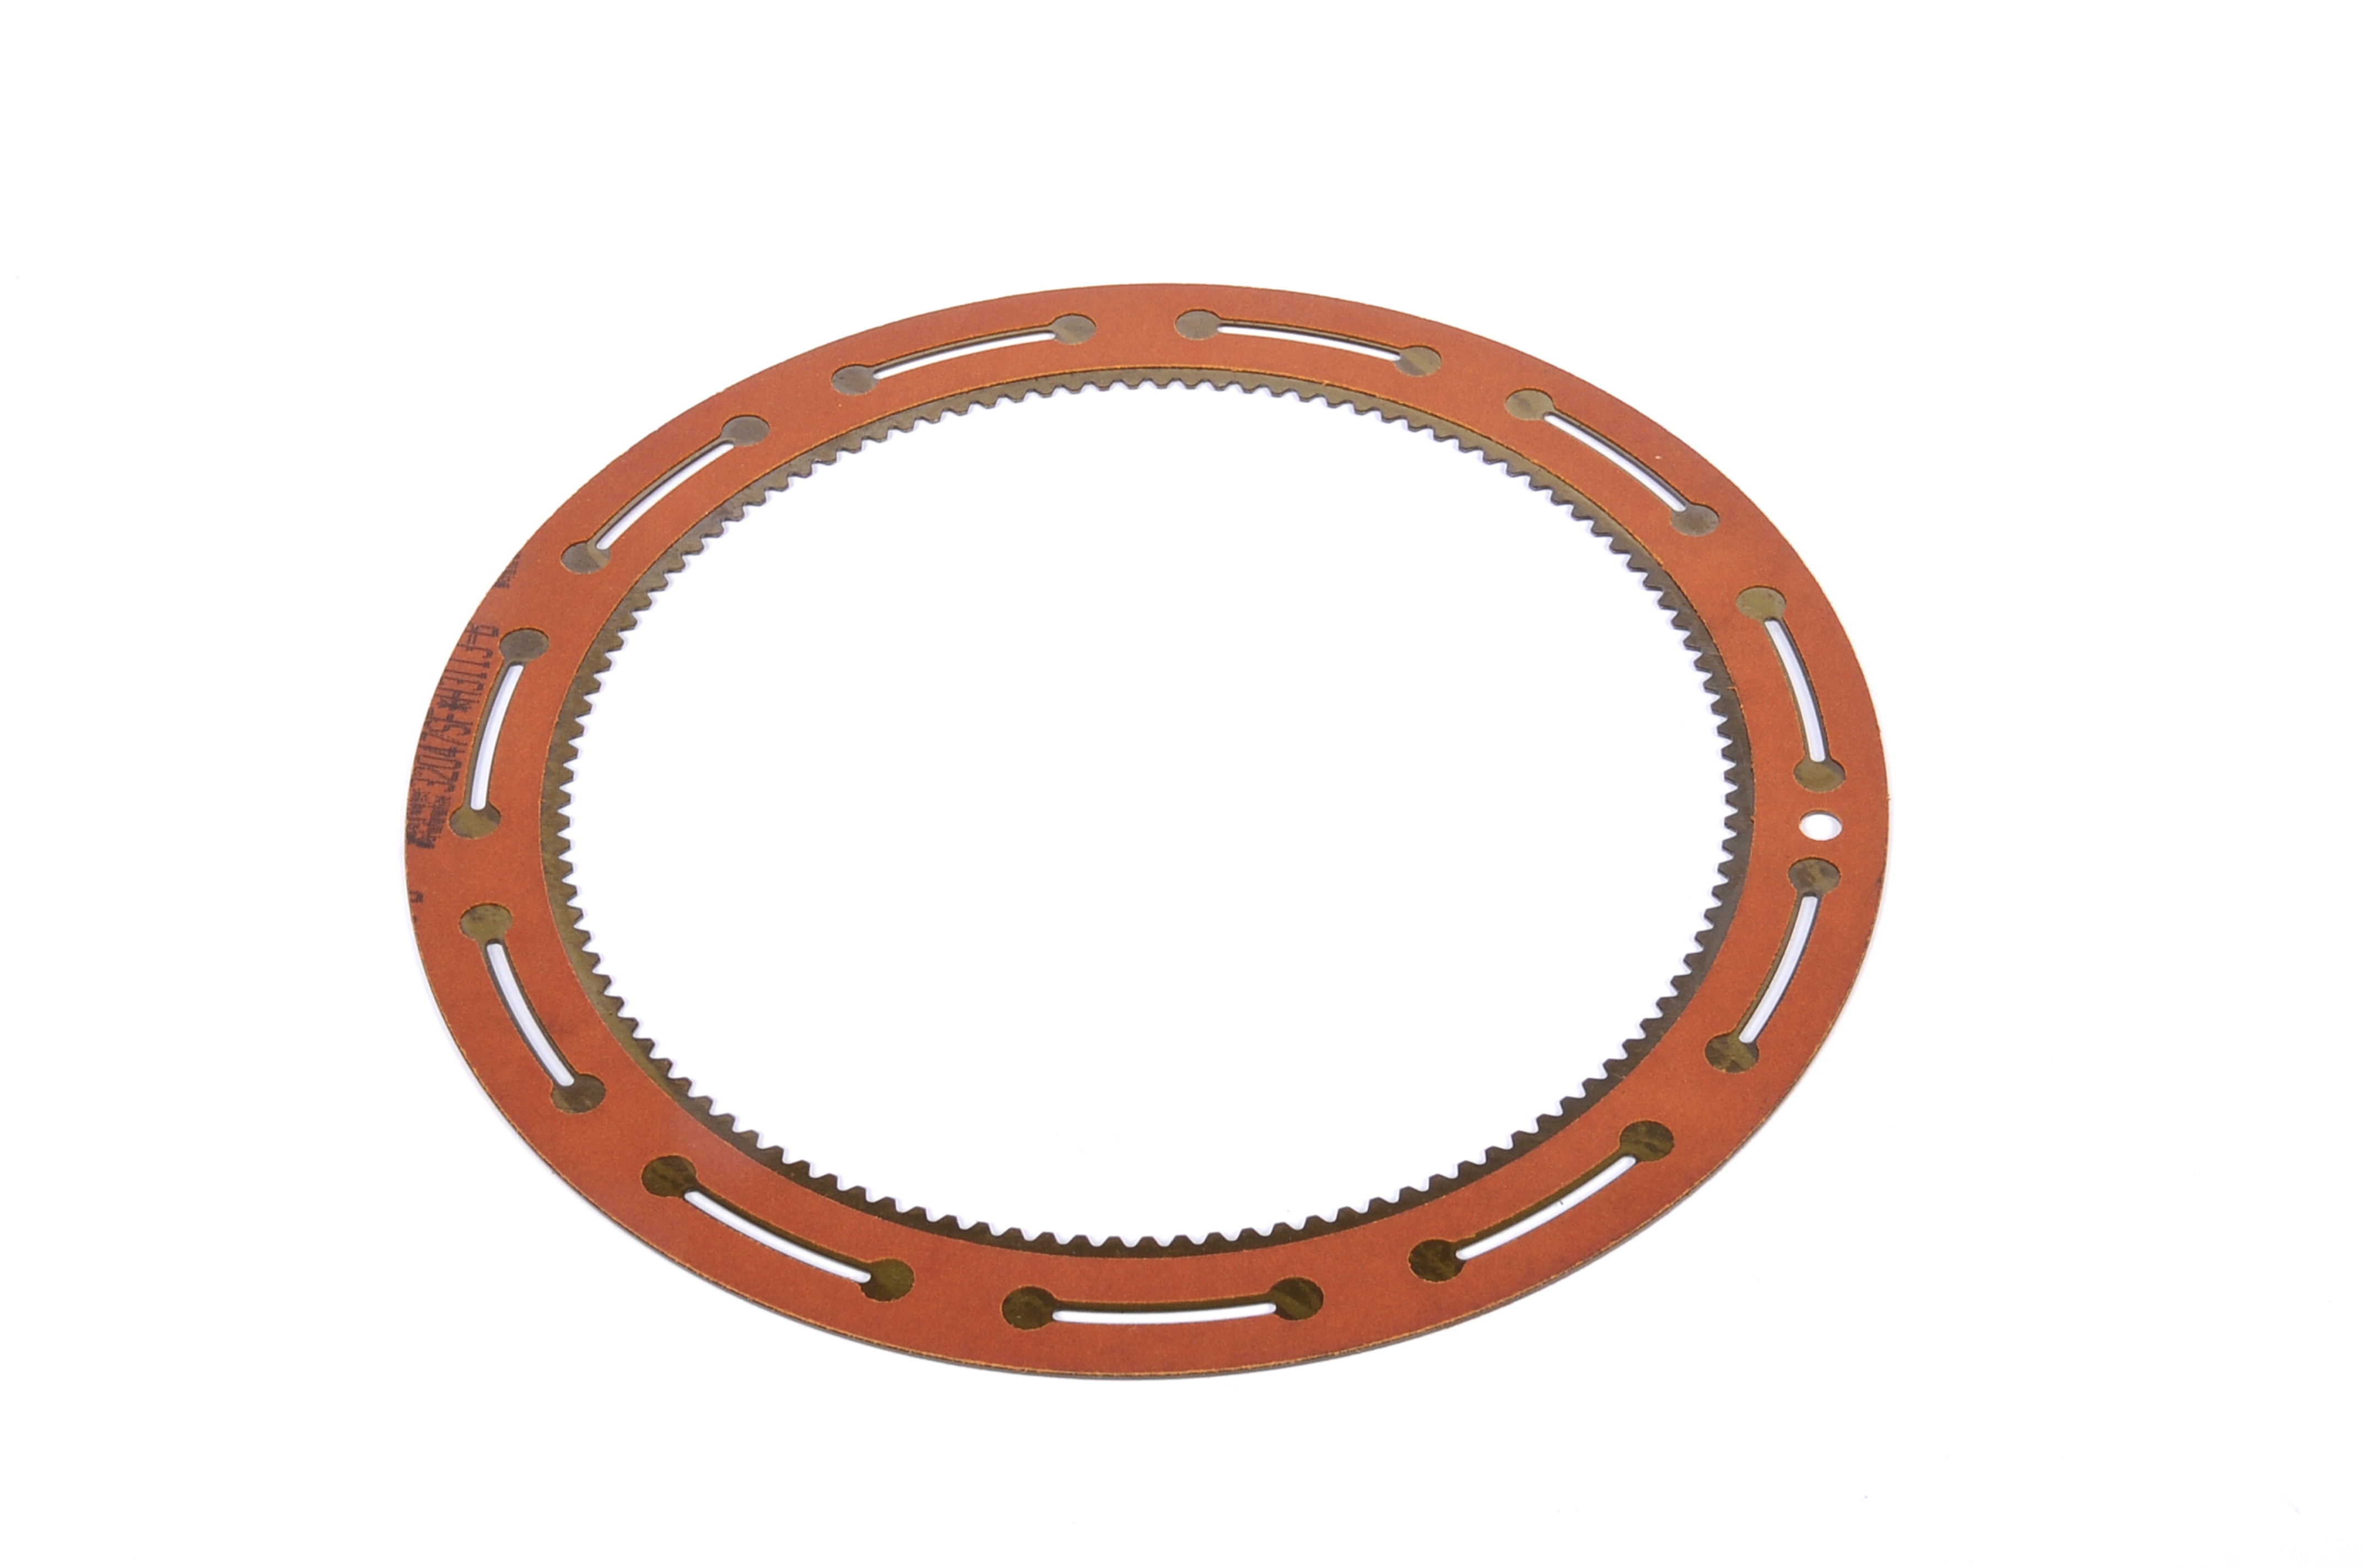 GM GENUINE PARTS - Transmission Clutch Friction Plate (3-5, Reverse) - GMP 29546270